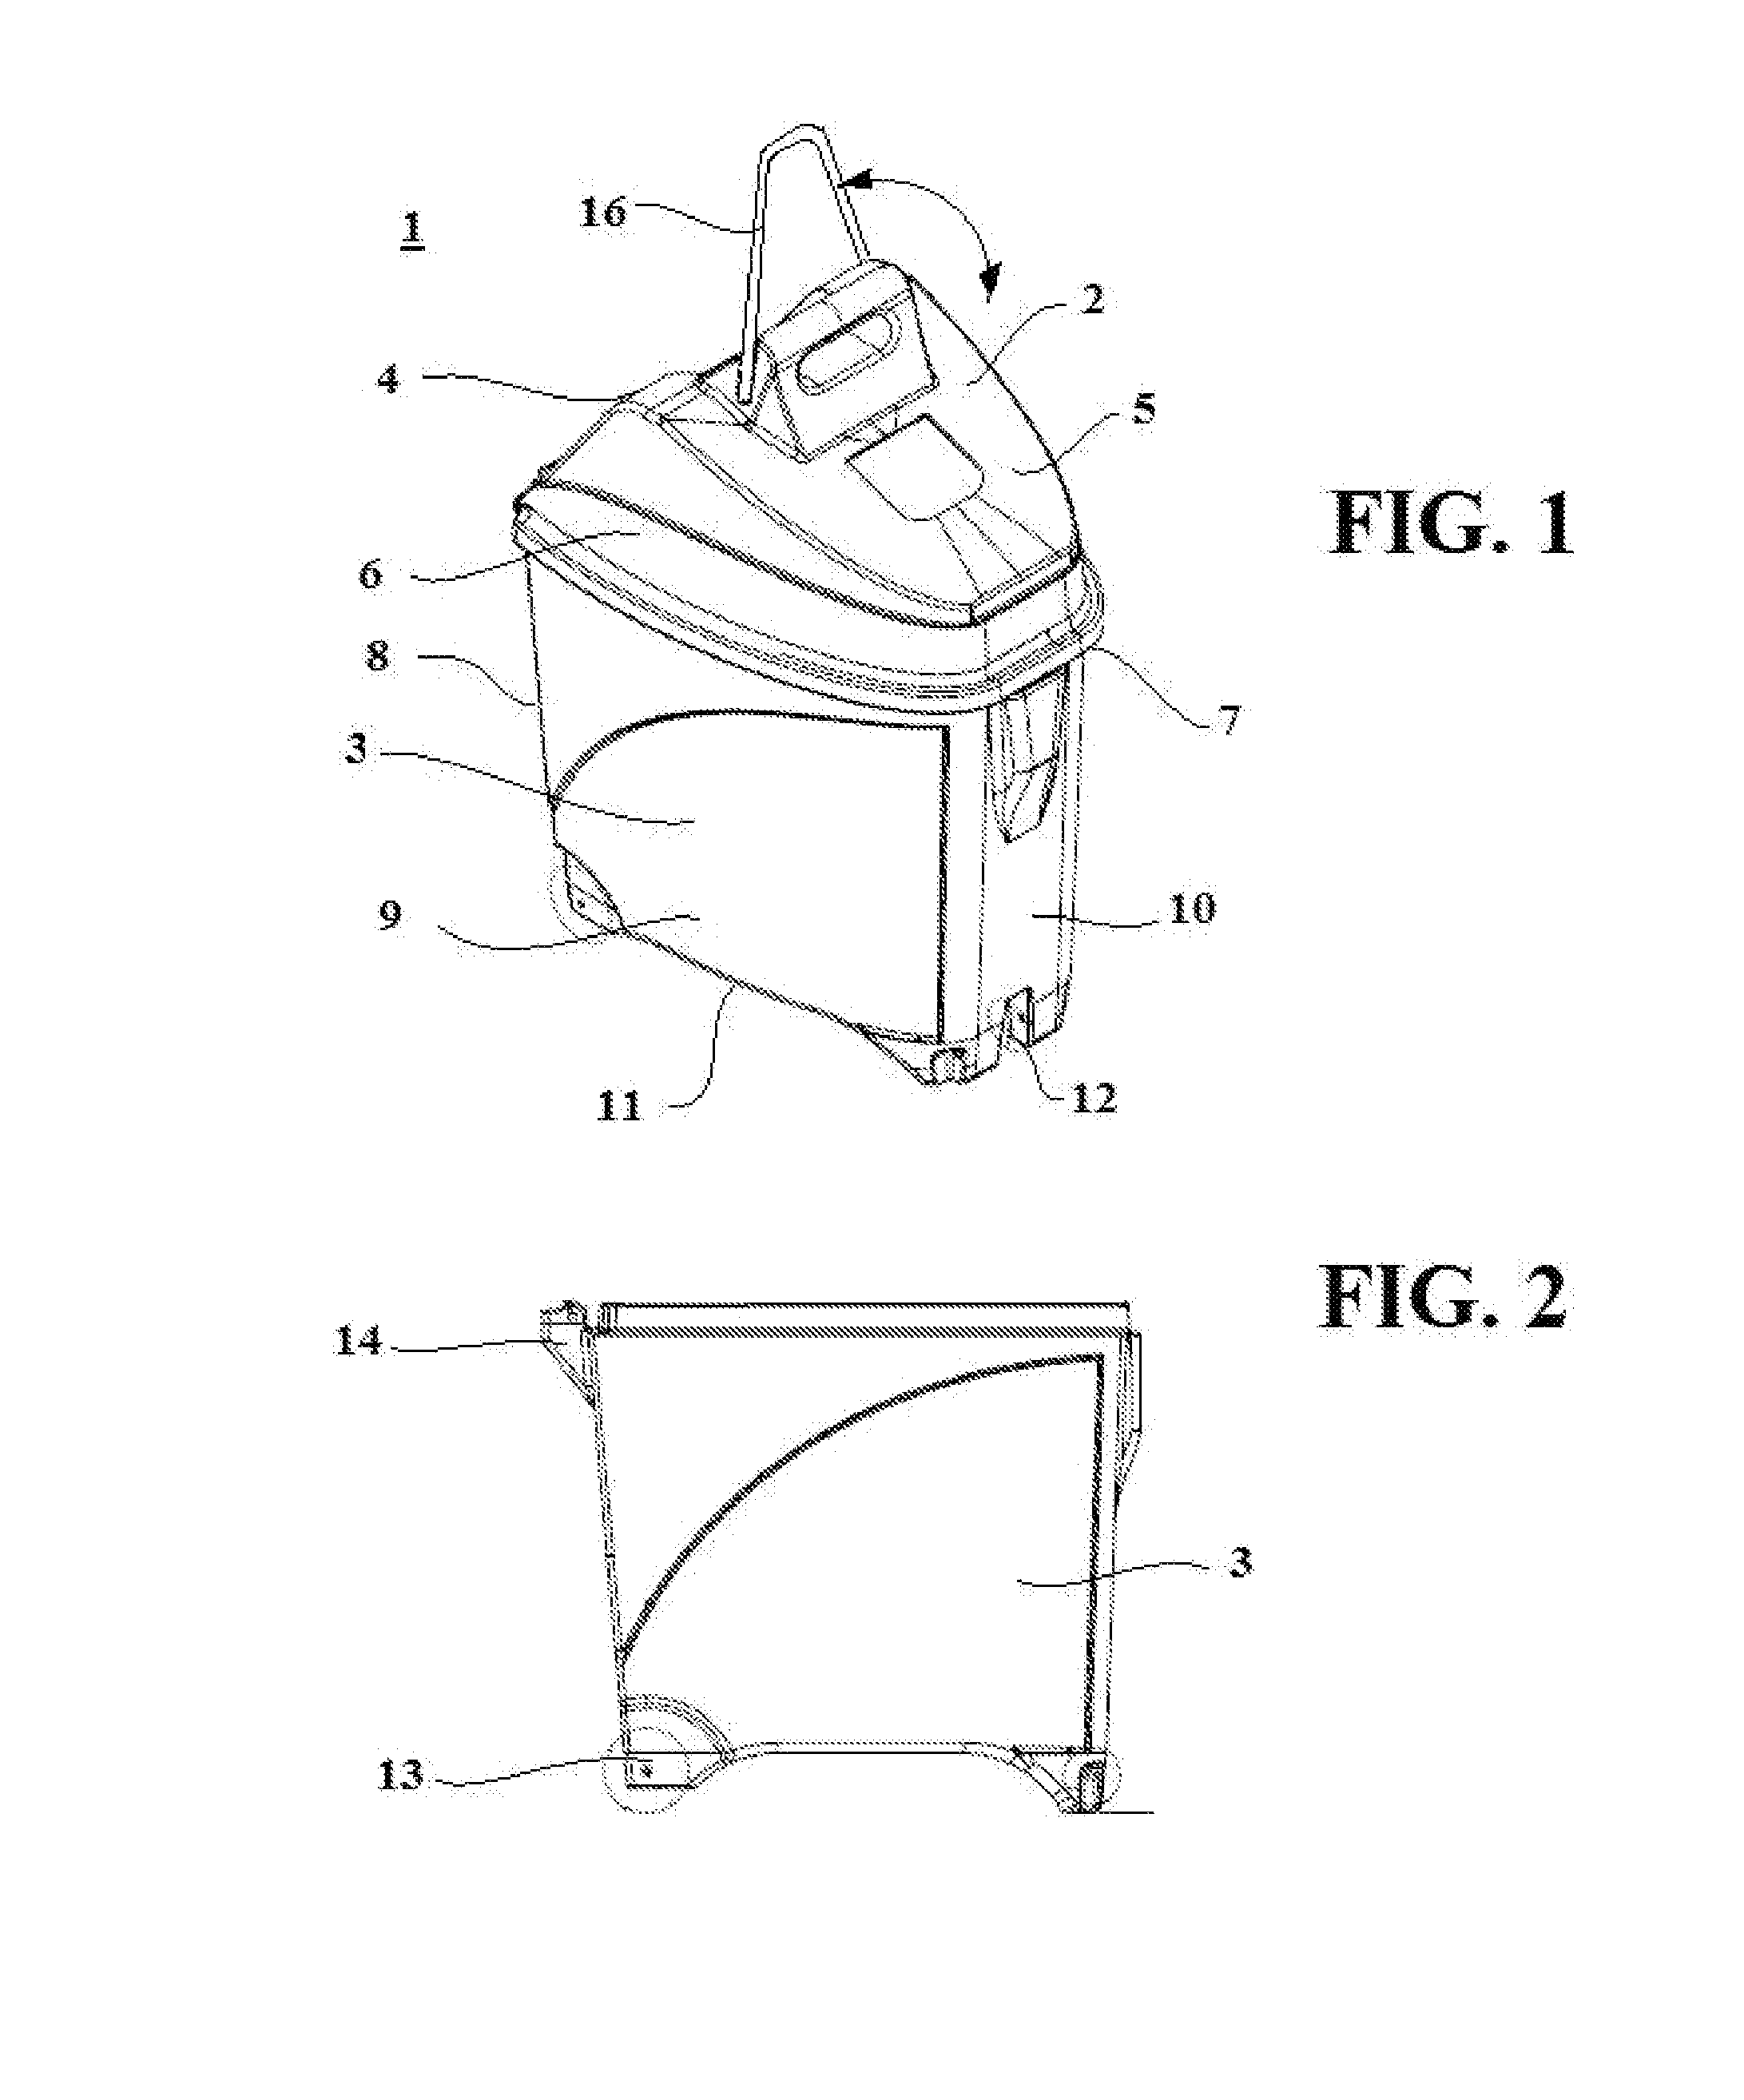 Method for mounting a cycle carrier system